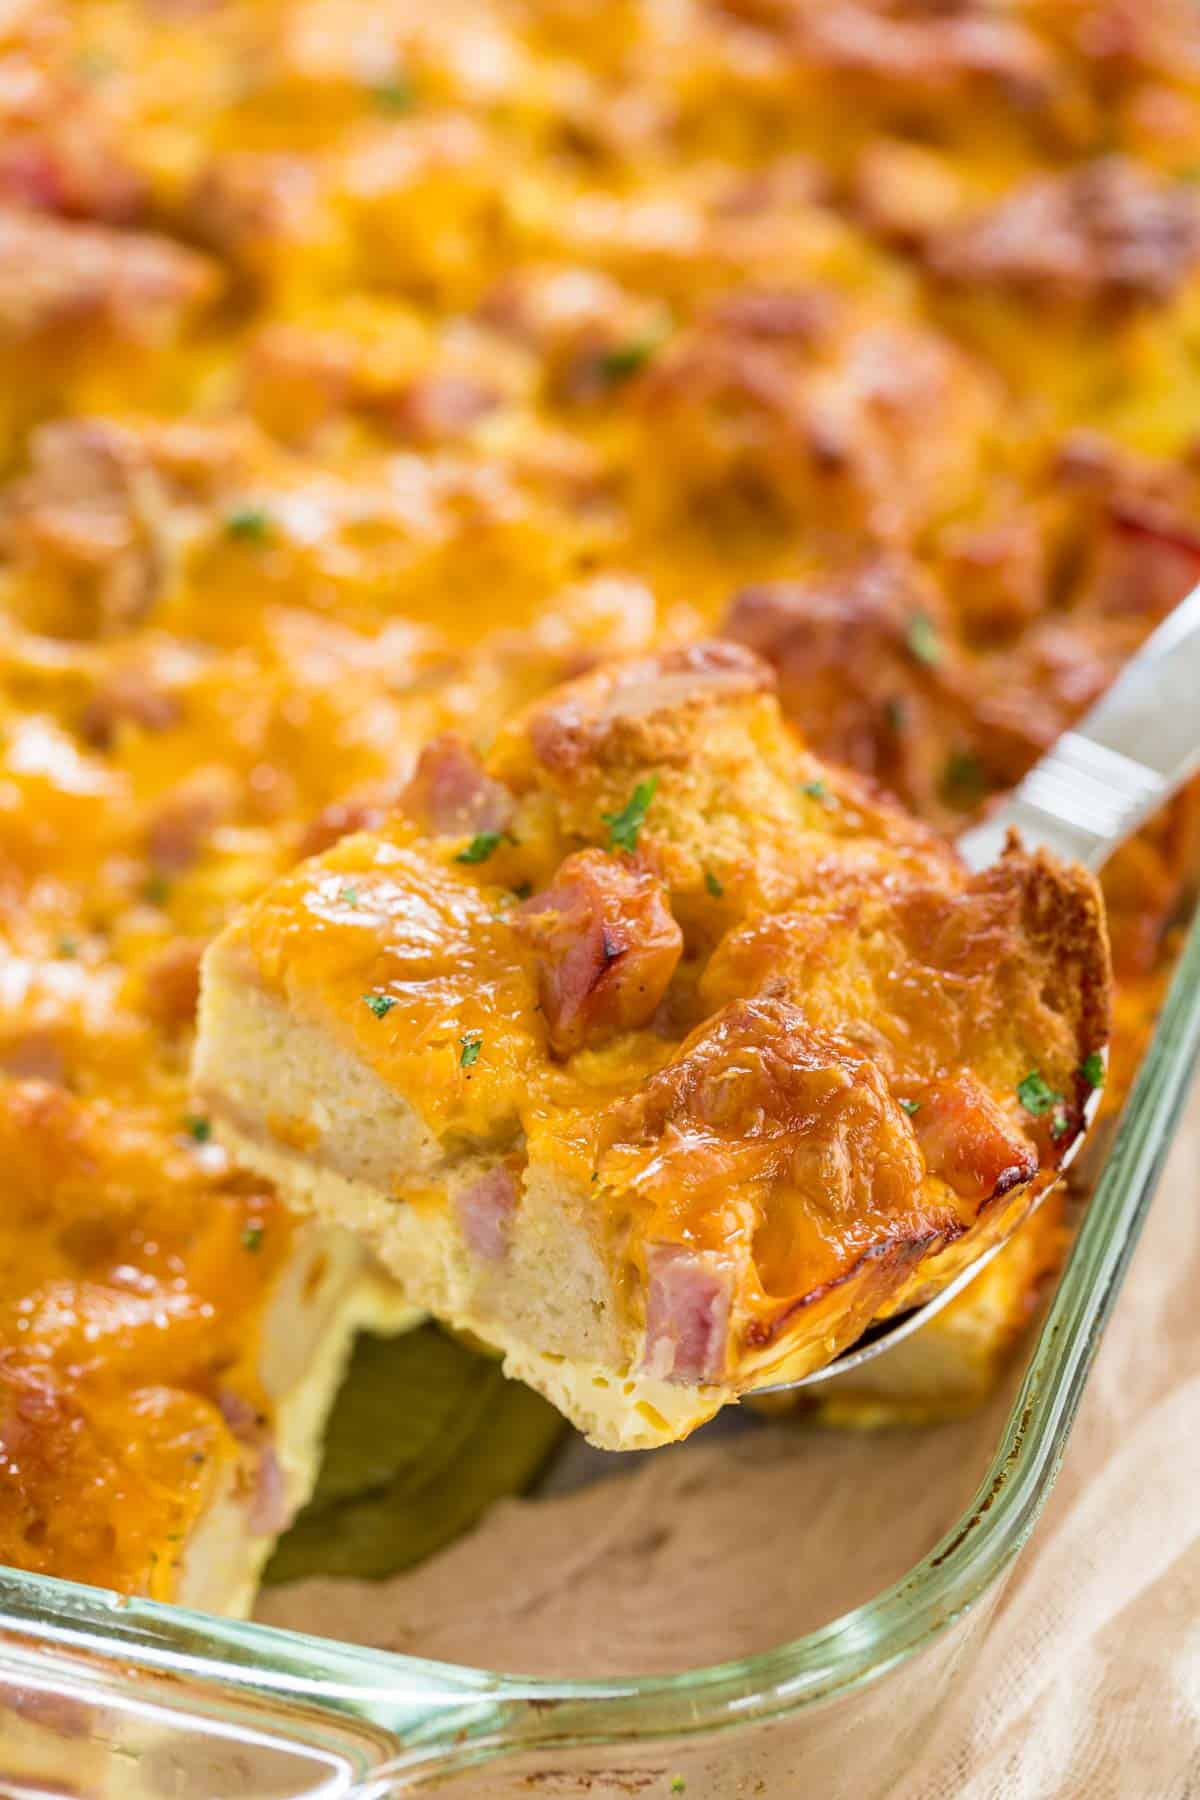 A slice of gluten free ham and cheese strata is lifted from a baking pan.